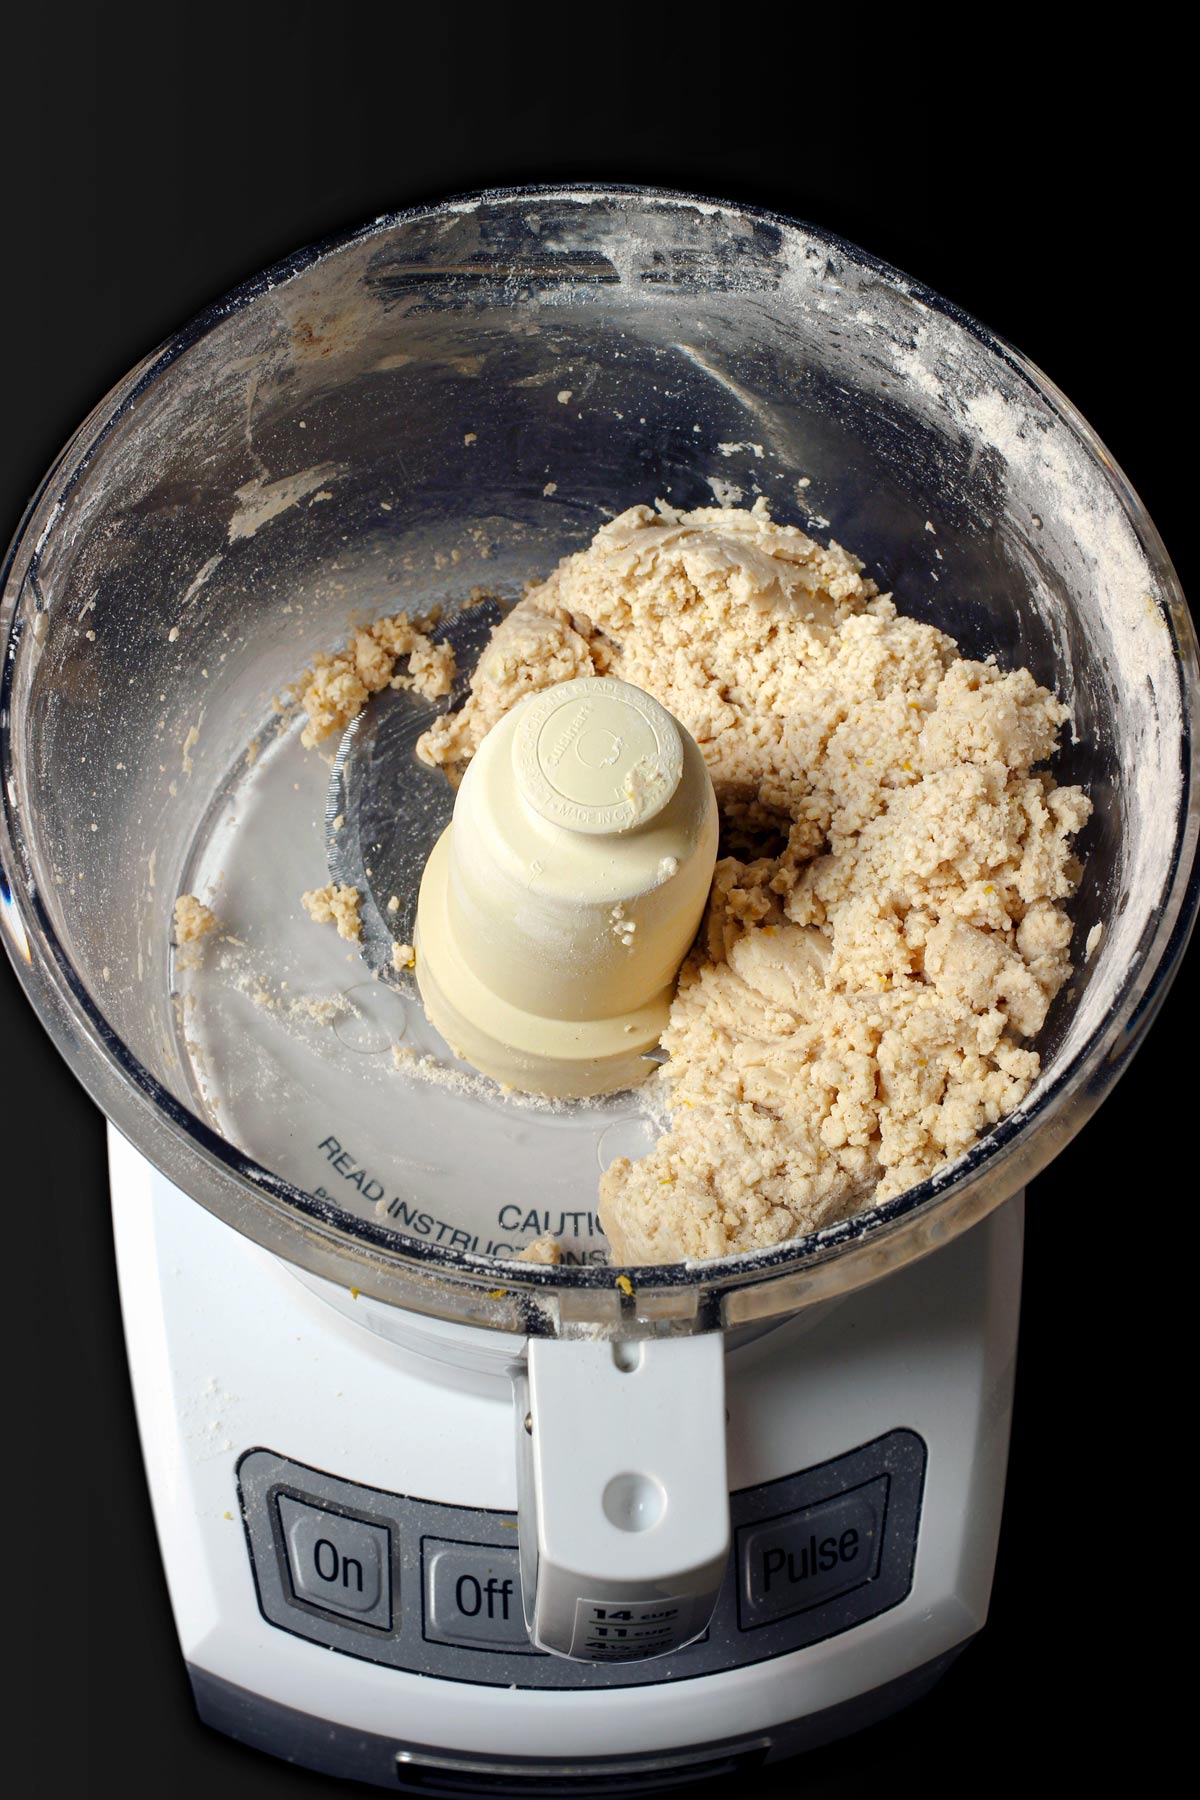 crumbs formed in bowl of food processor.